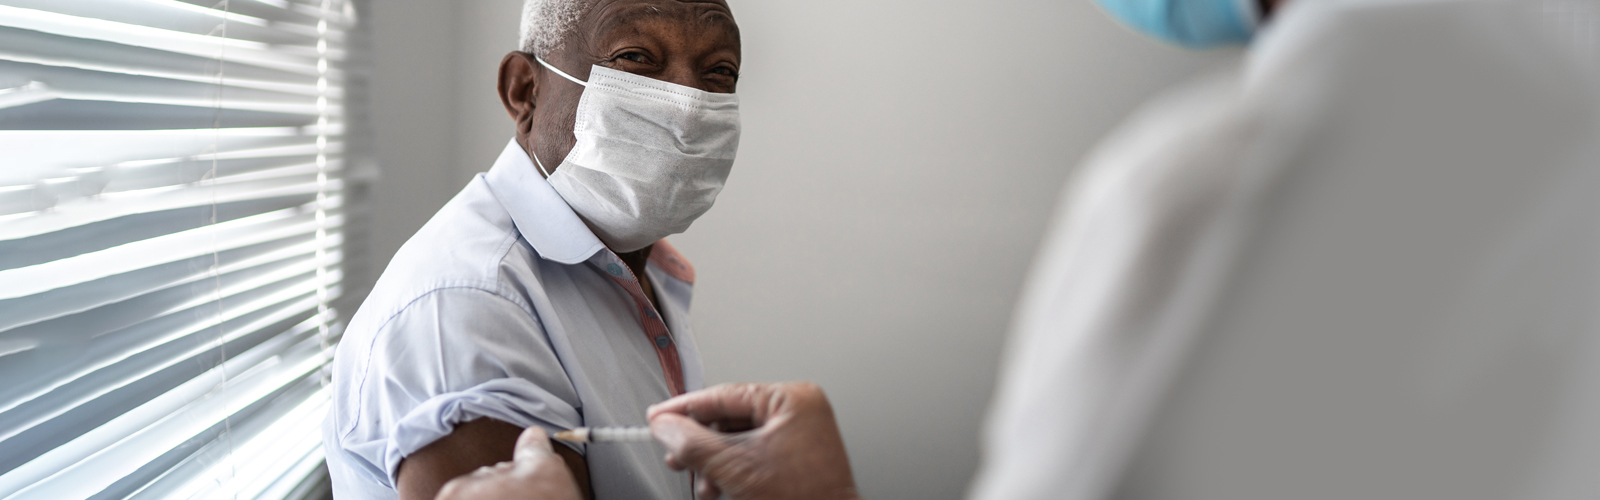 An older man wearing a face mask receives the vaccine